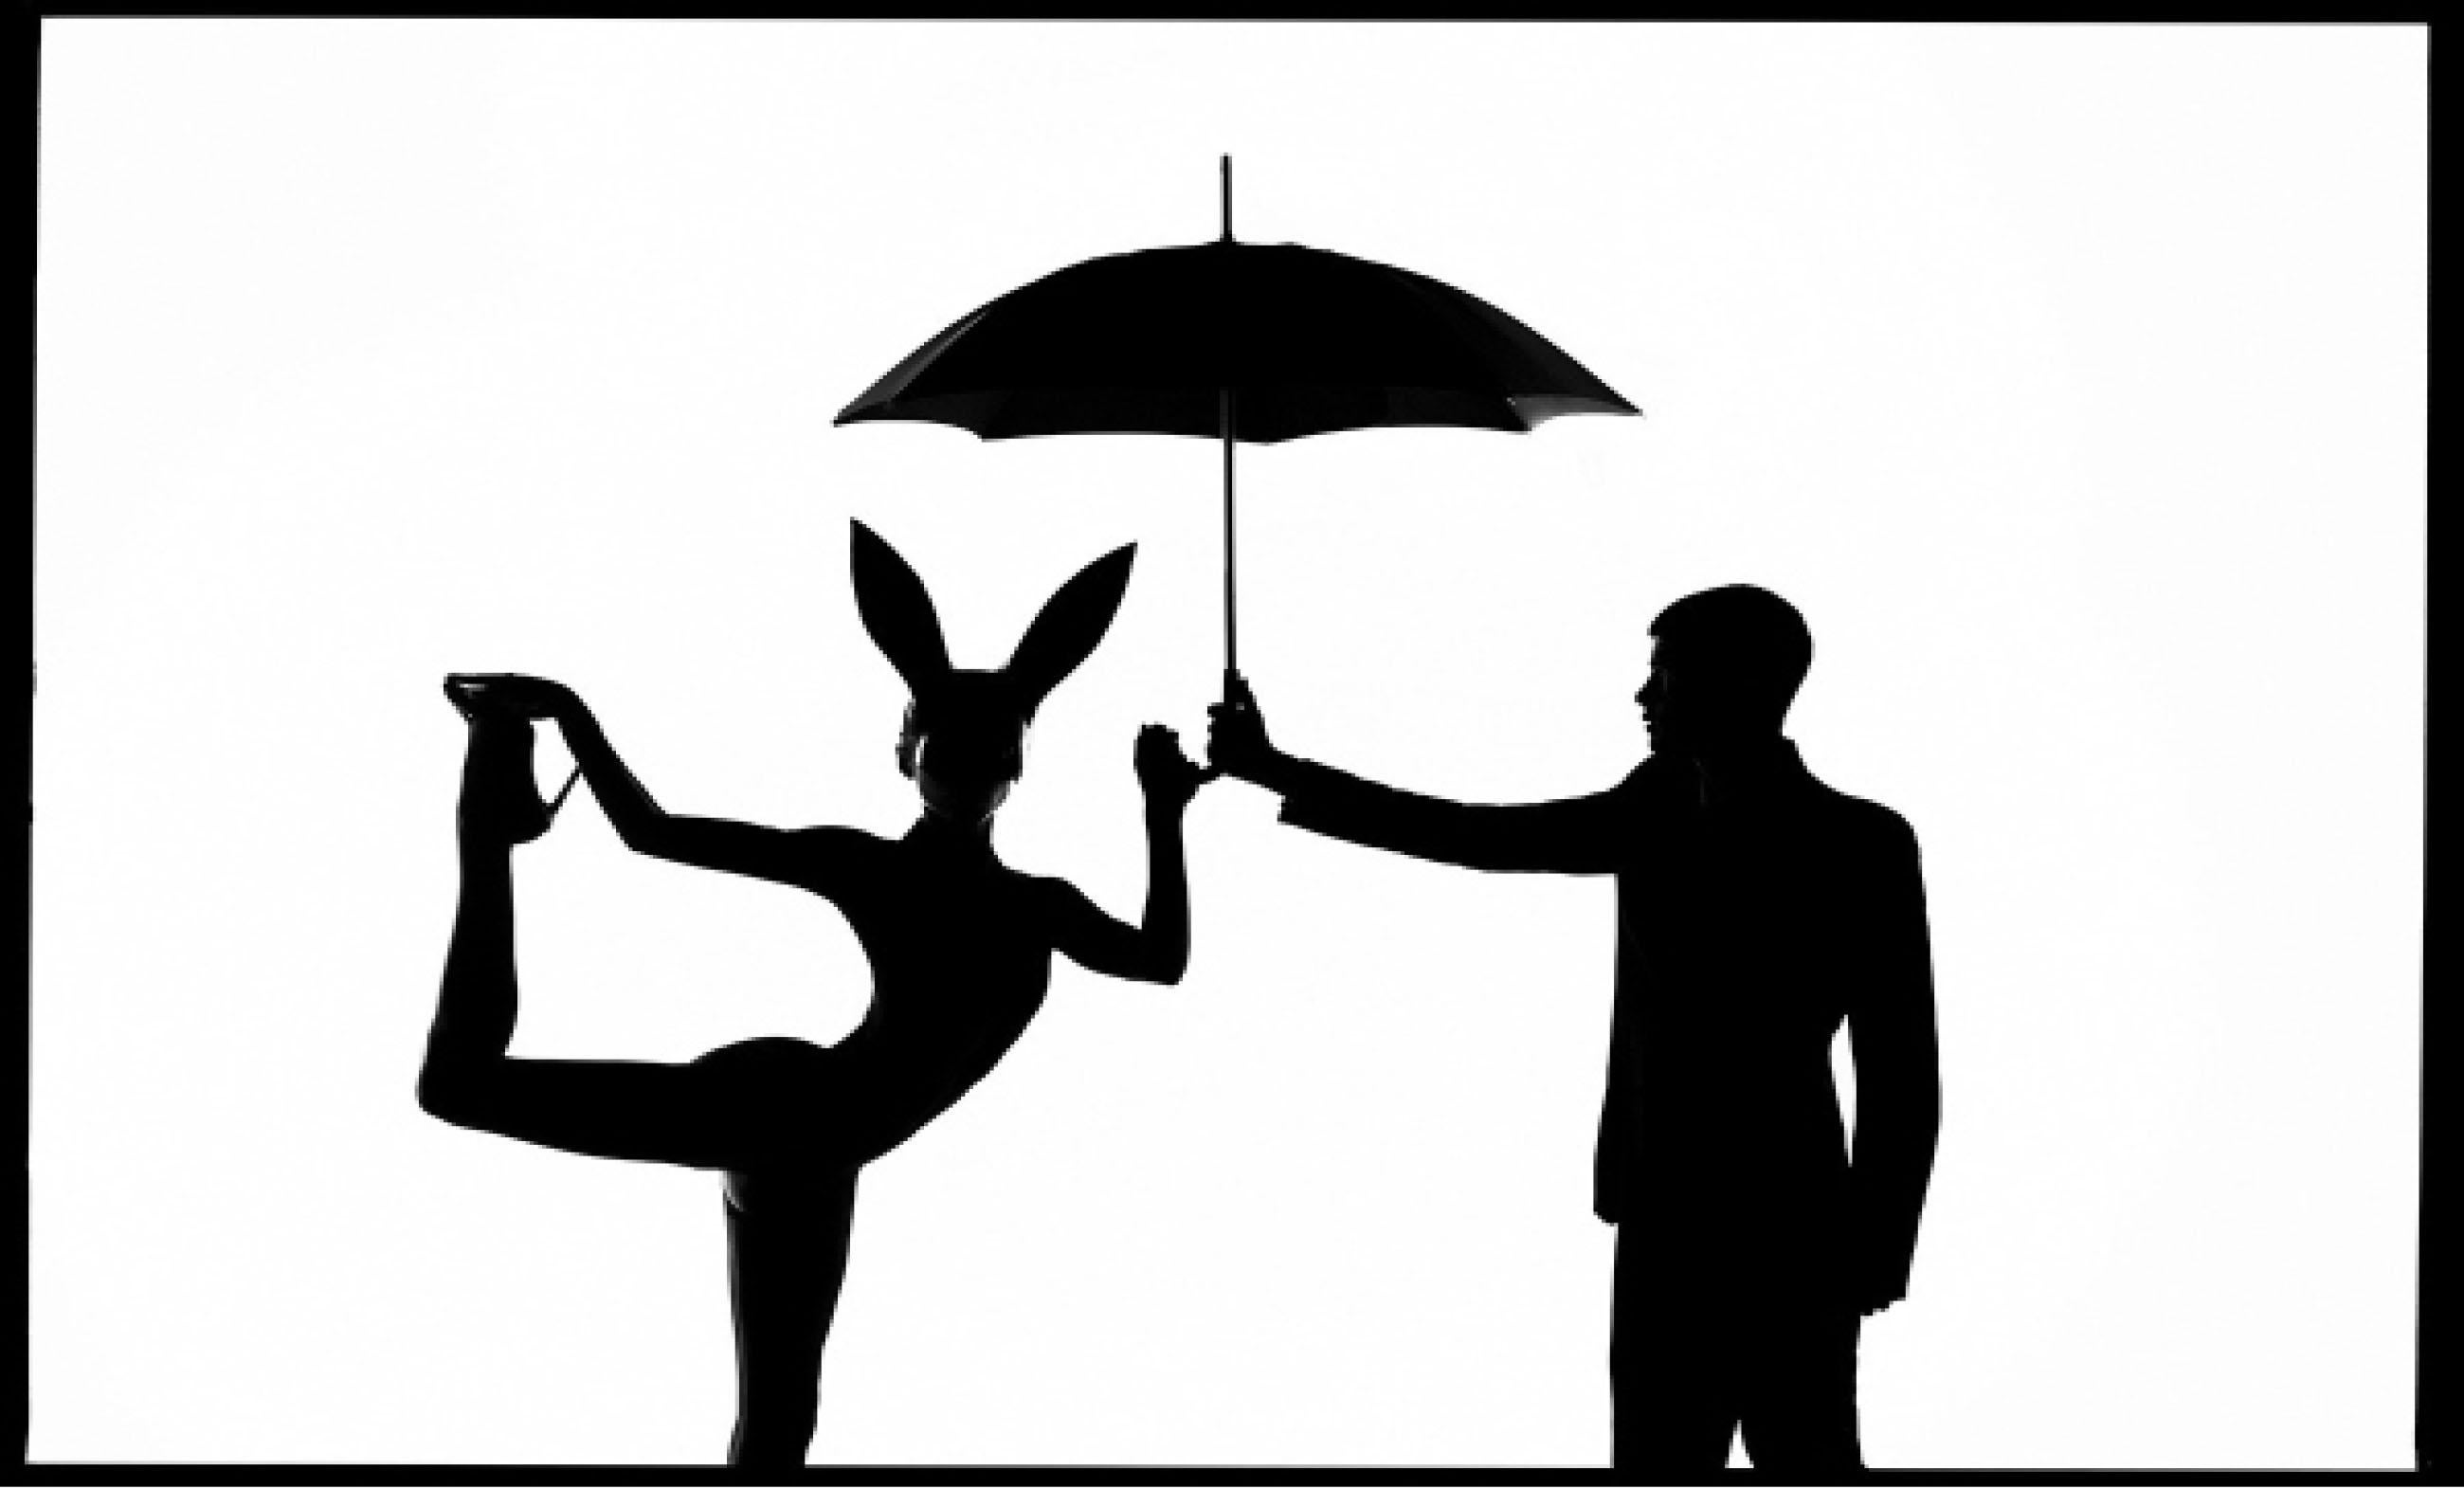 Tyler Shields - The Bunny and the Man, Fotografie 2020, Nachdruck